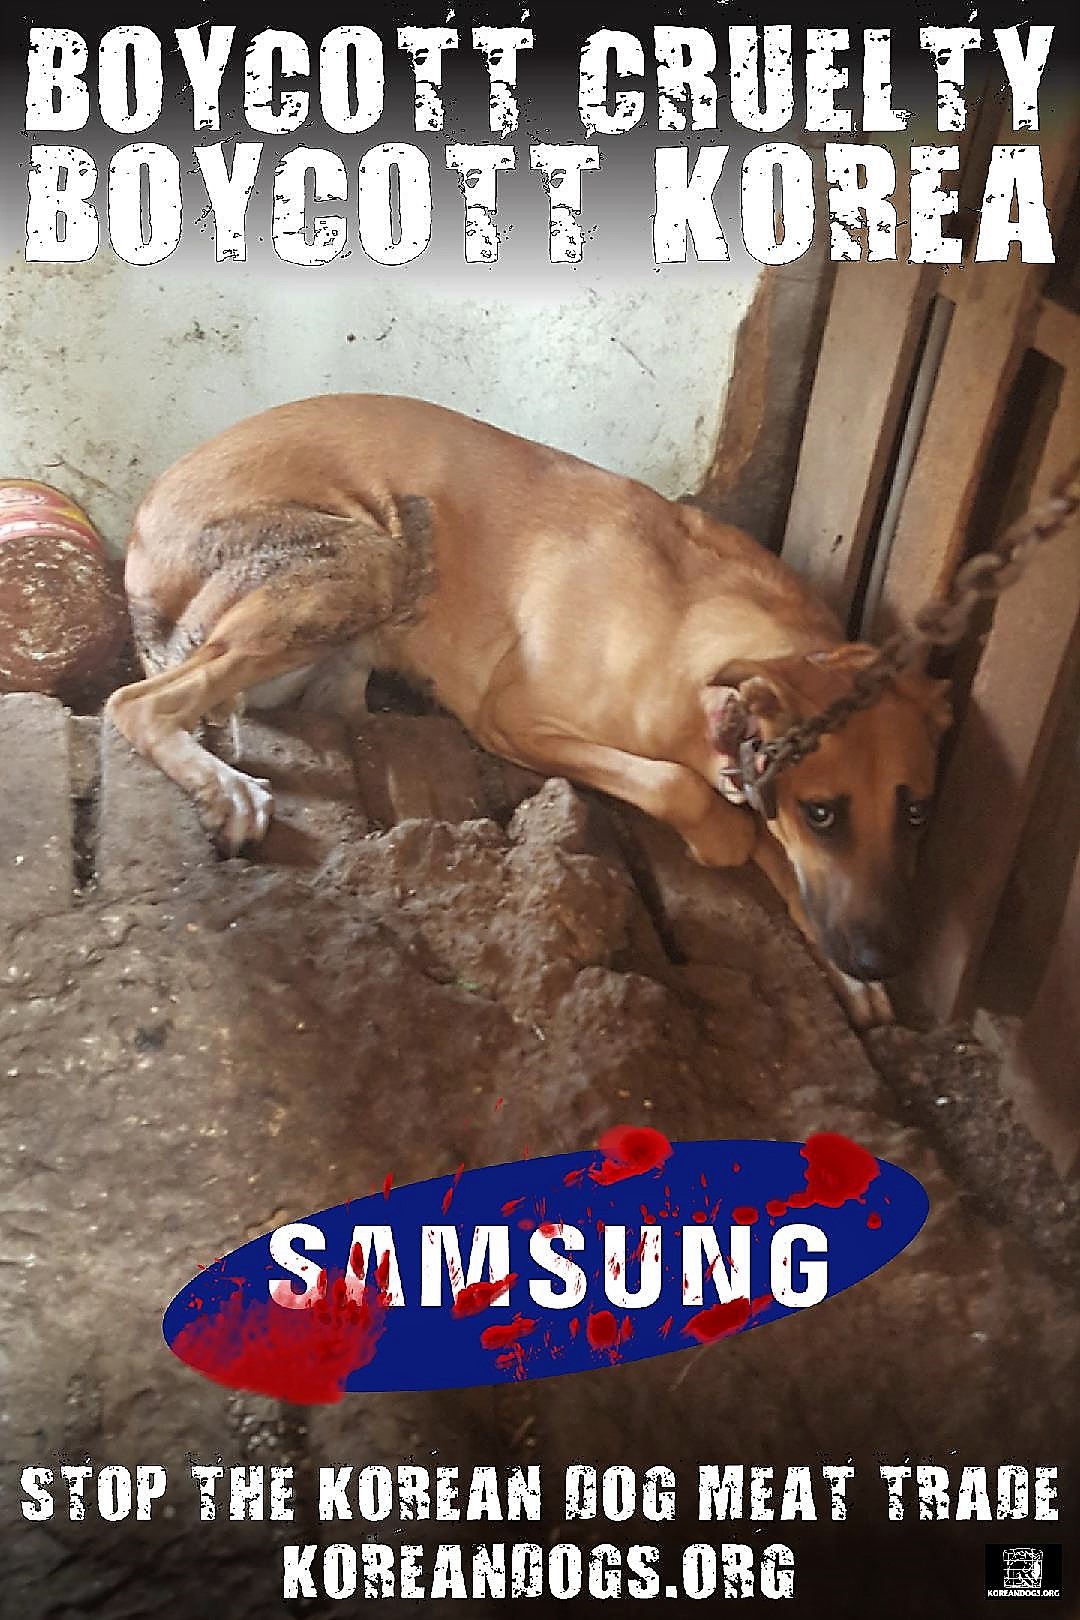 Samsung must speak out against the brutality of South Korea!